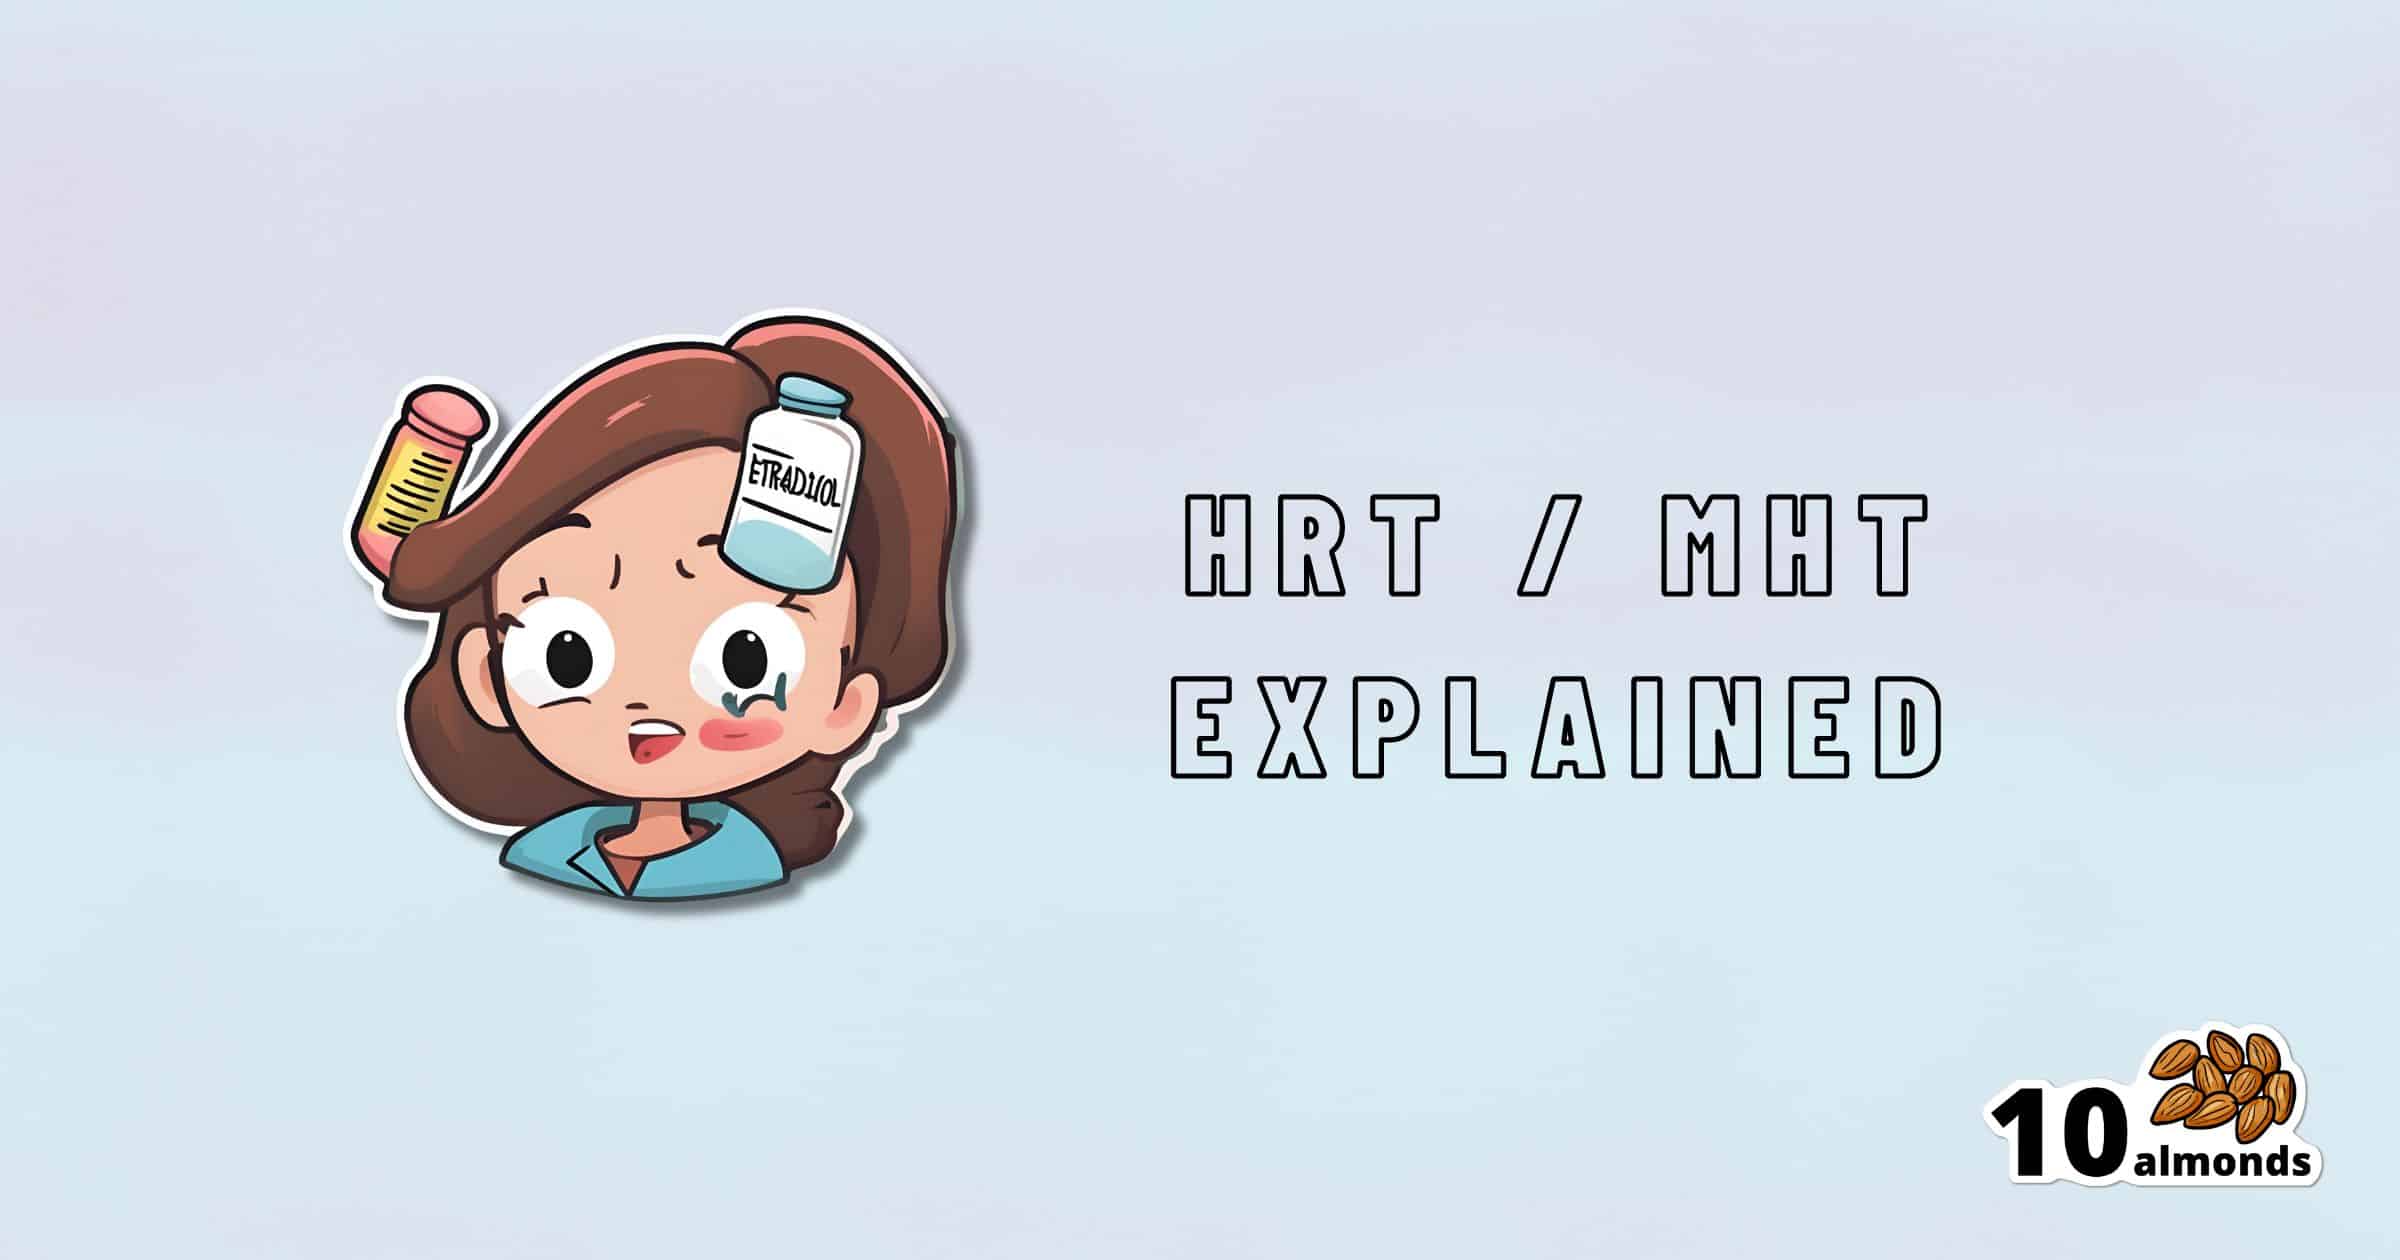 Illustration of a cartoon woman holding a bottle labeled "HORMONES," with a pill bottle next to her head. Text on the right reads "HRT EXPLAINED." Logo with the text "10 almonds" is in the bottom right corner.